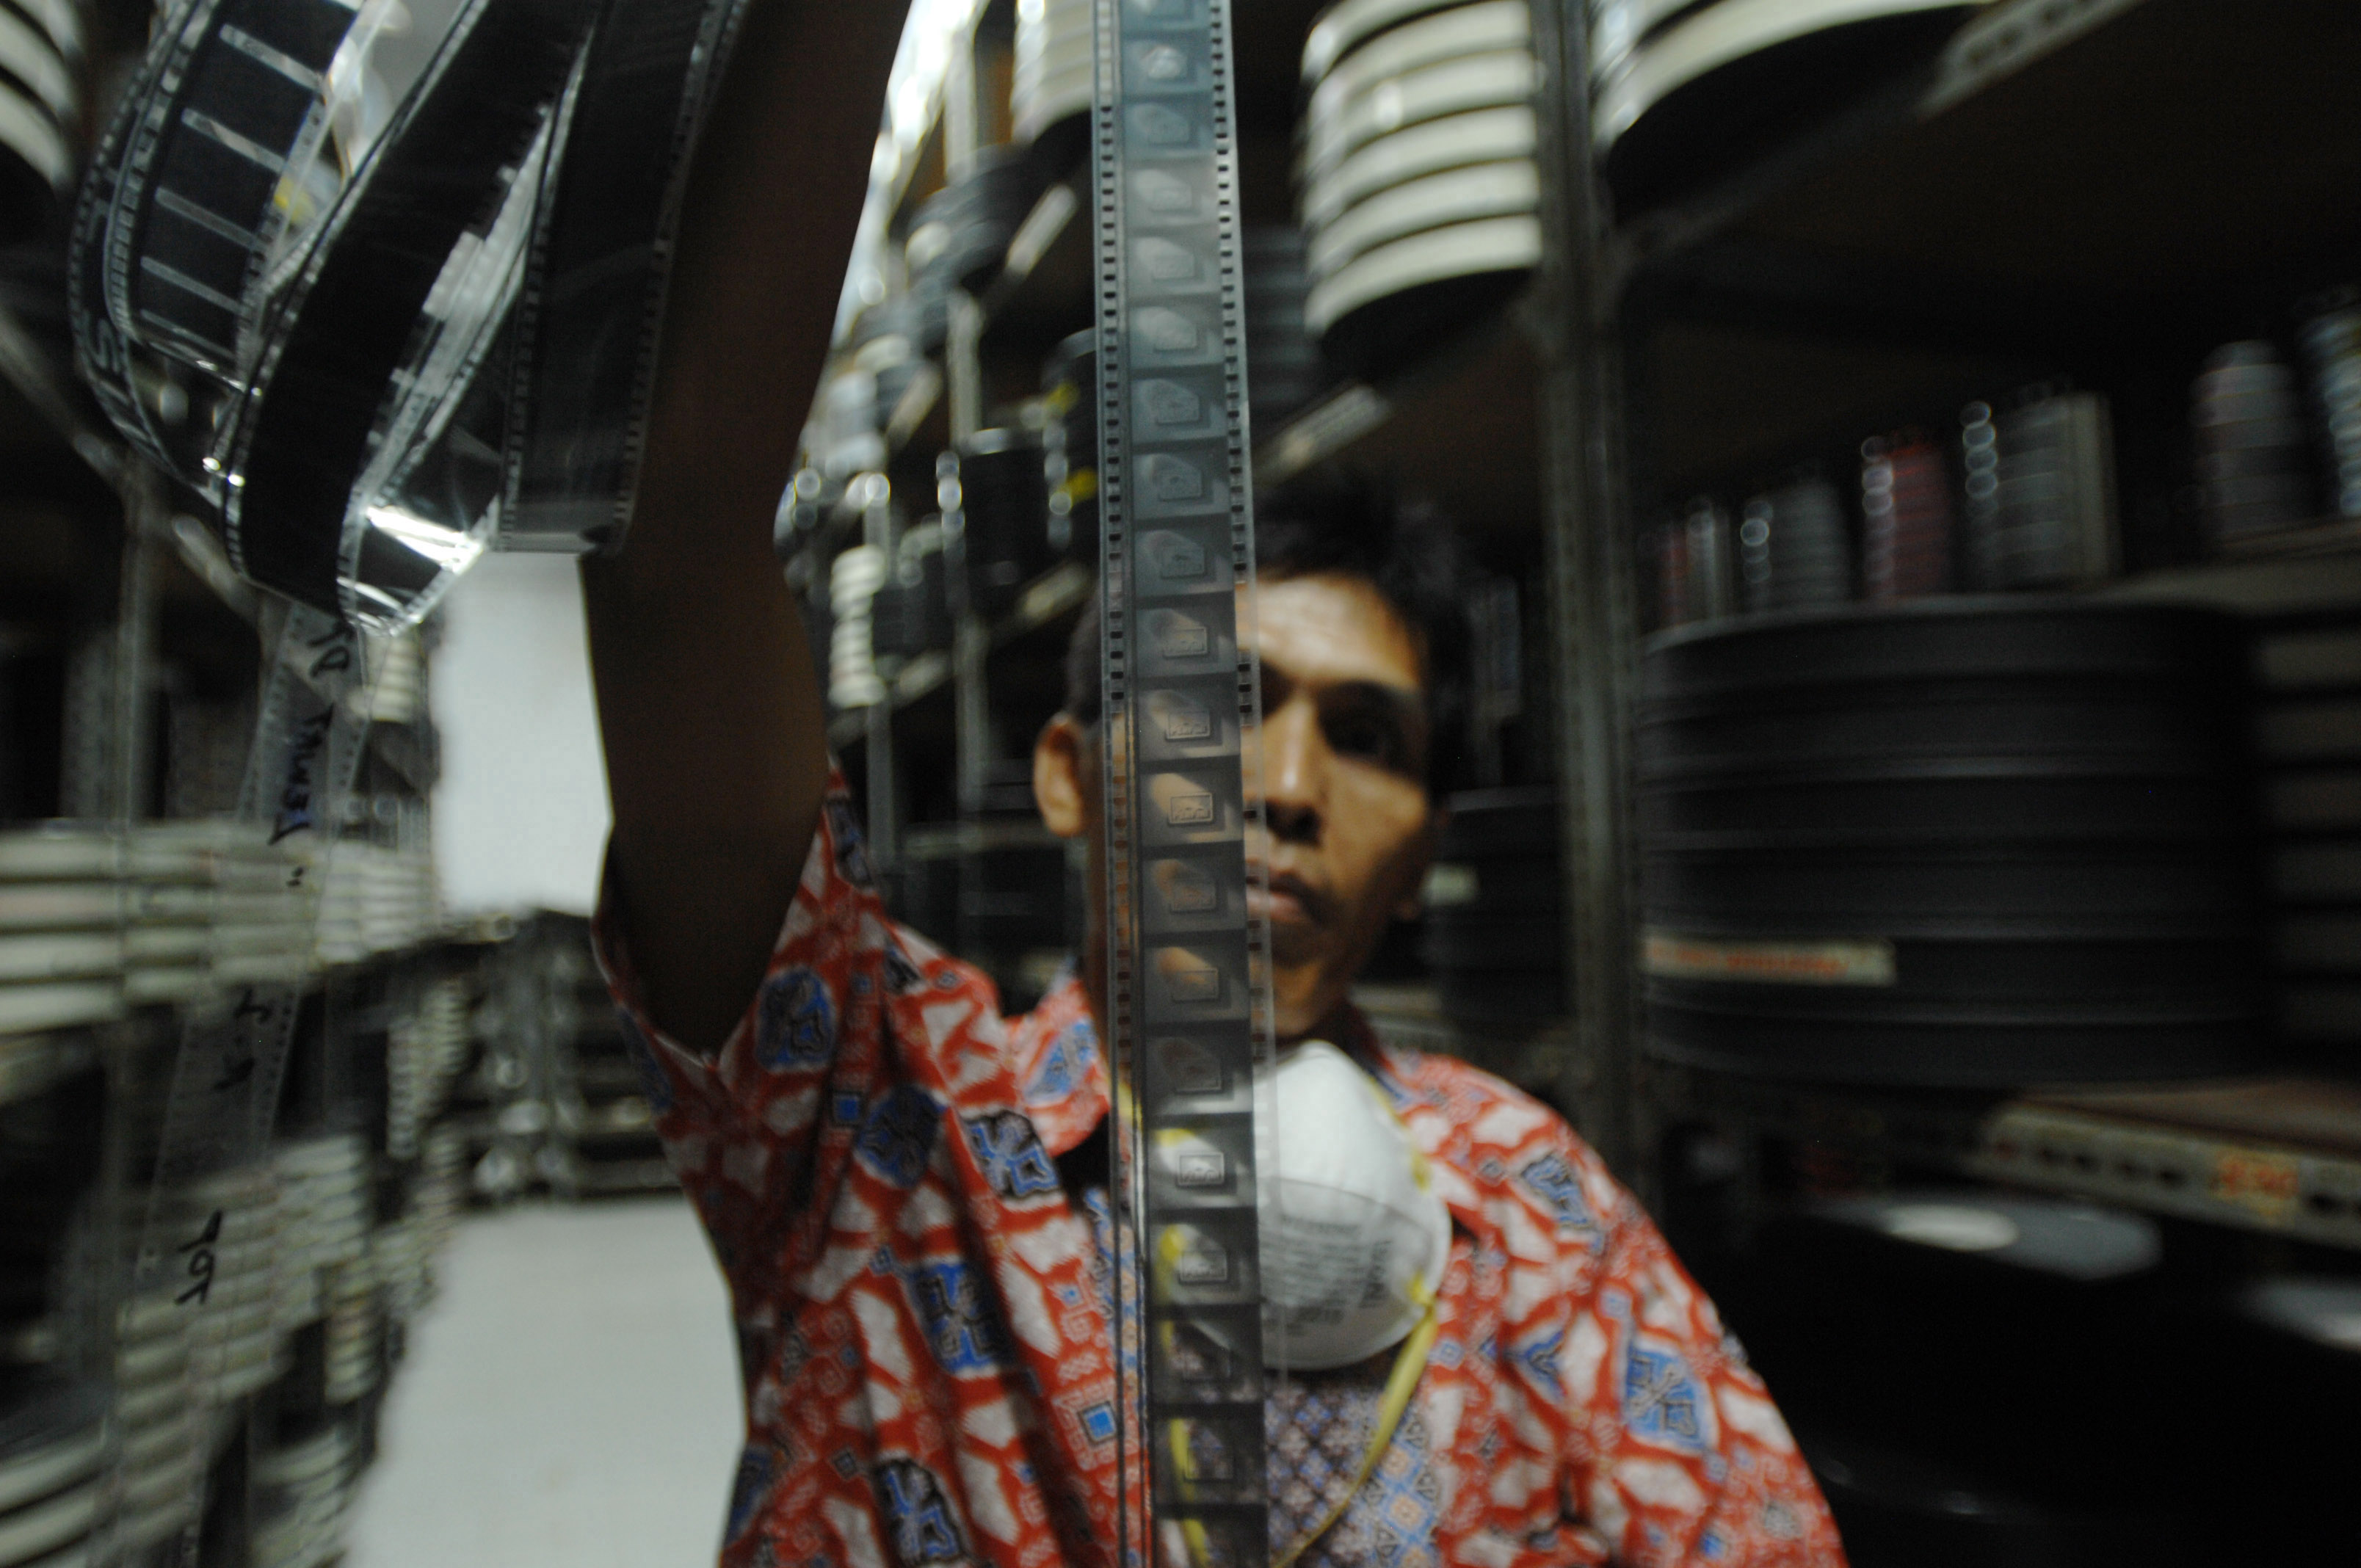 A film archivist holds up a film roll in the storage room at the Usmar Ismail Building in Jakarta, Indonesia on Oct. 28, 2016. (Dasril Roszandi—NurPhoto/Getty Images)